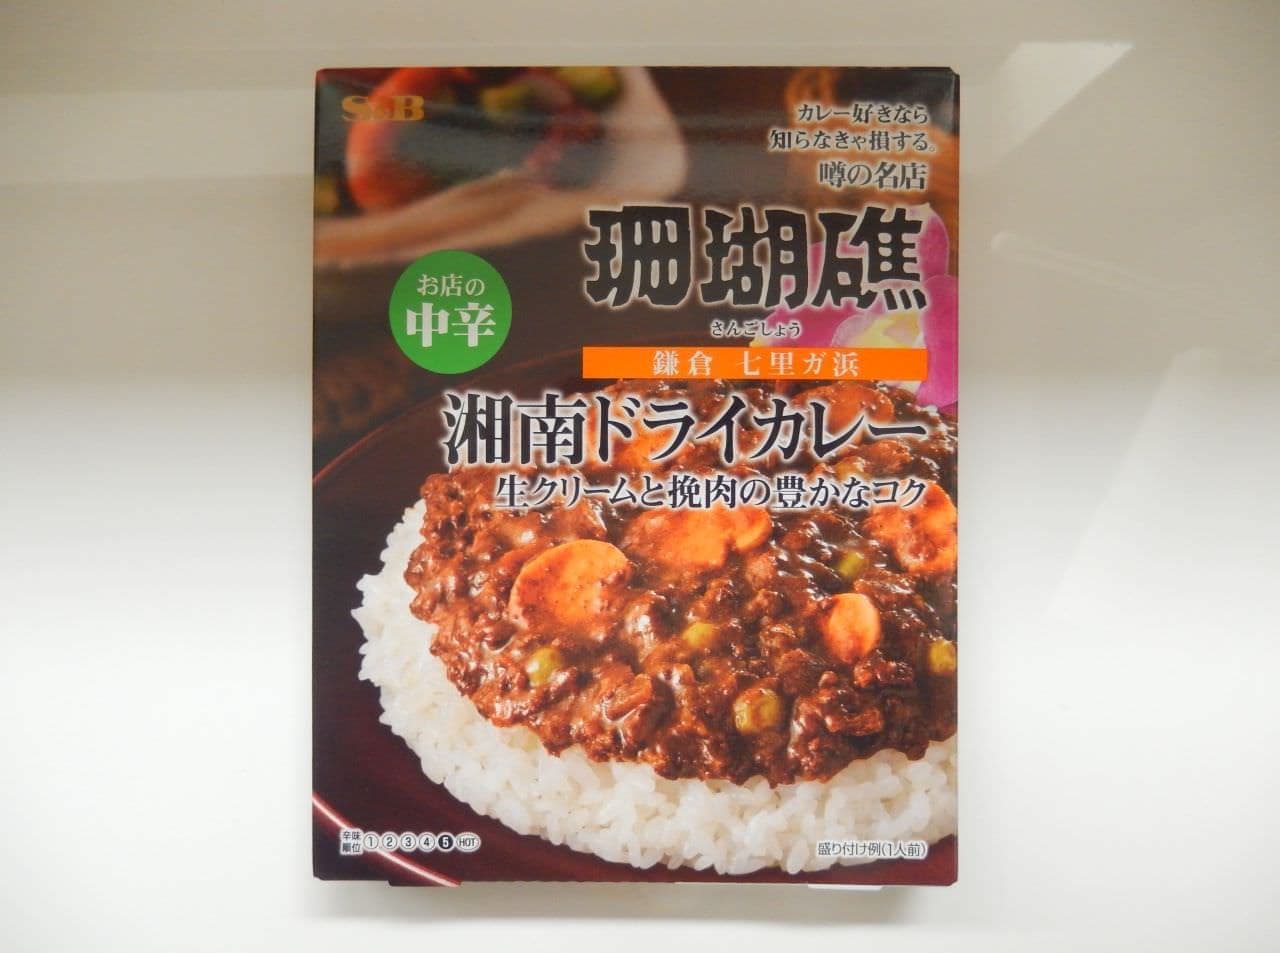 "Shonan Dry Curry" is a retort pouch of the dry curry from "Coral Reef", a procession store in Shichirigahama, Kamakura.